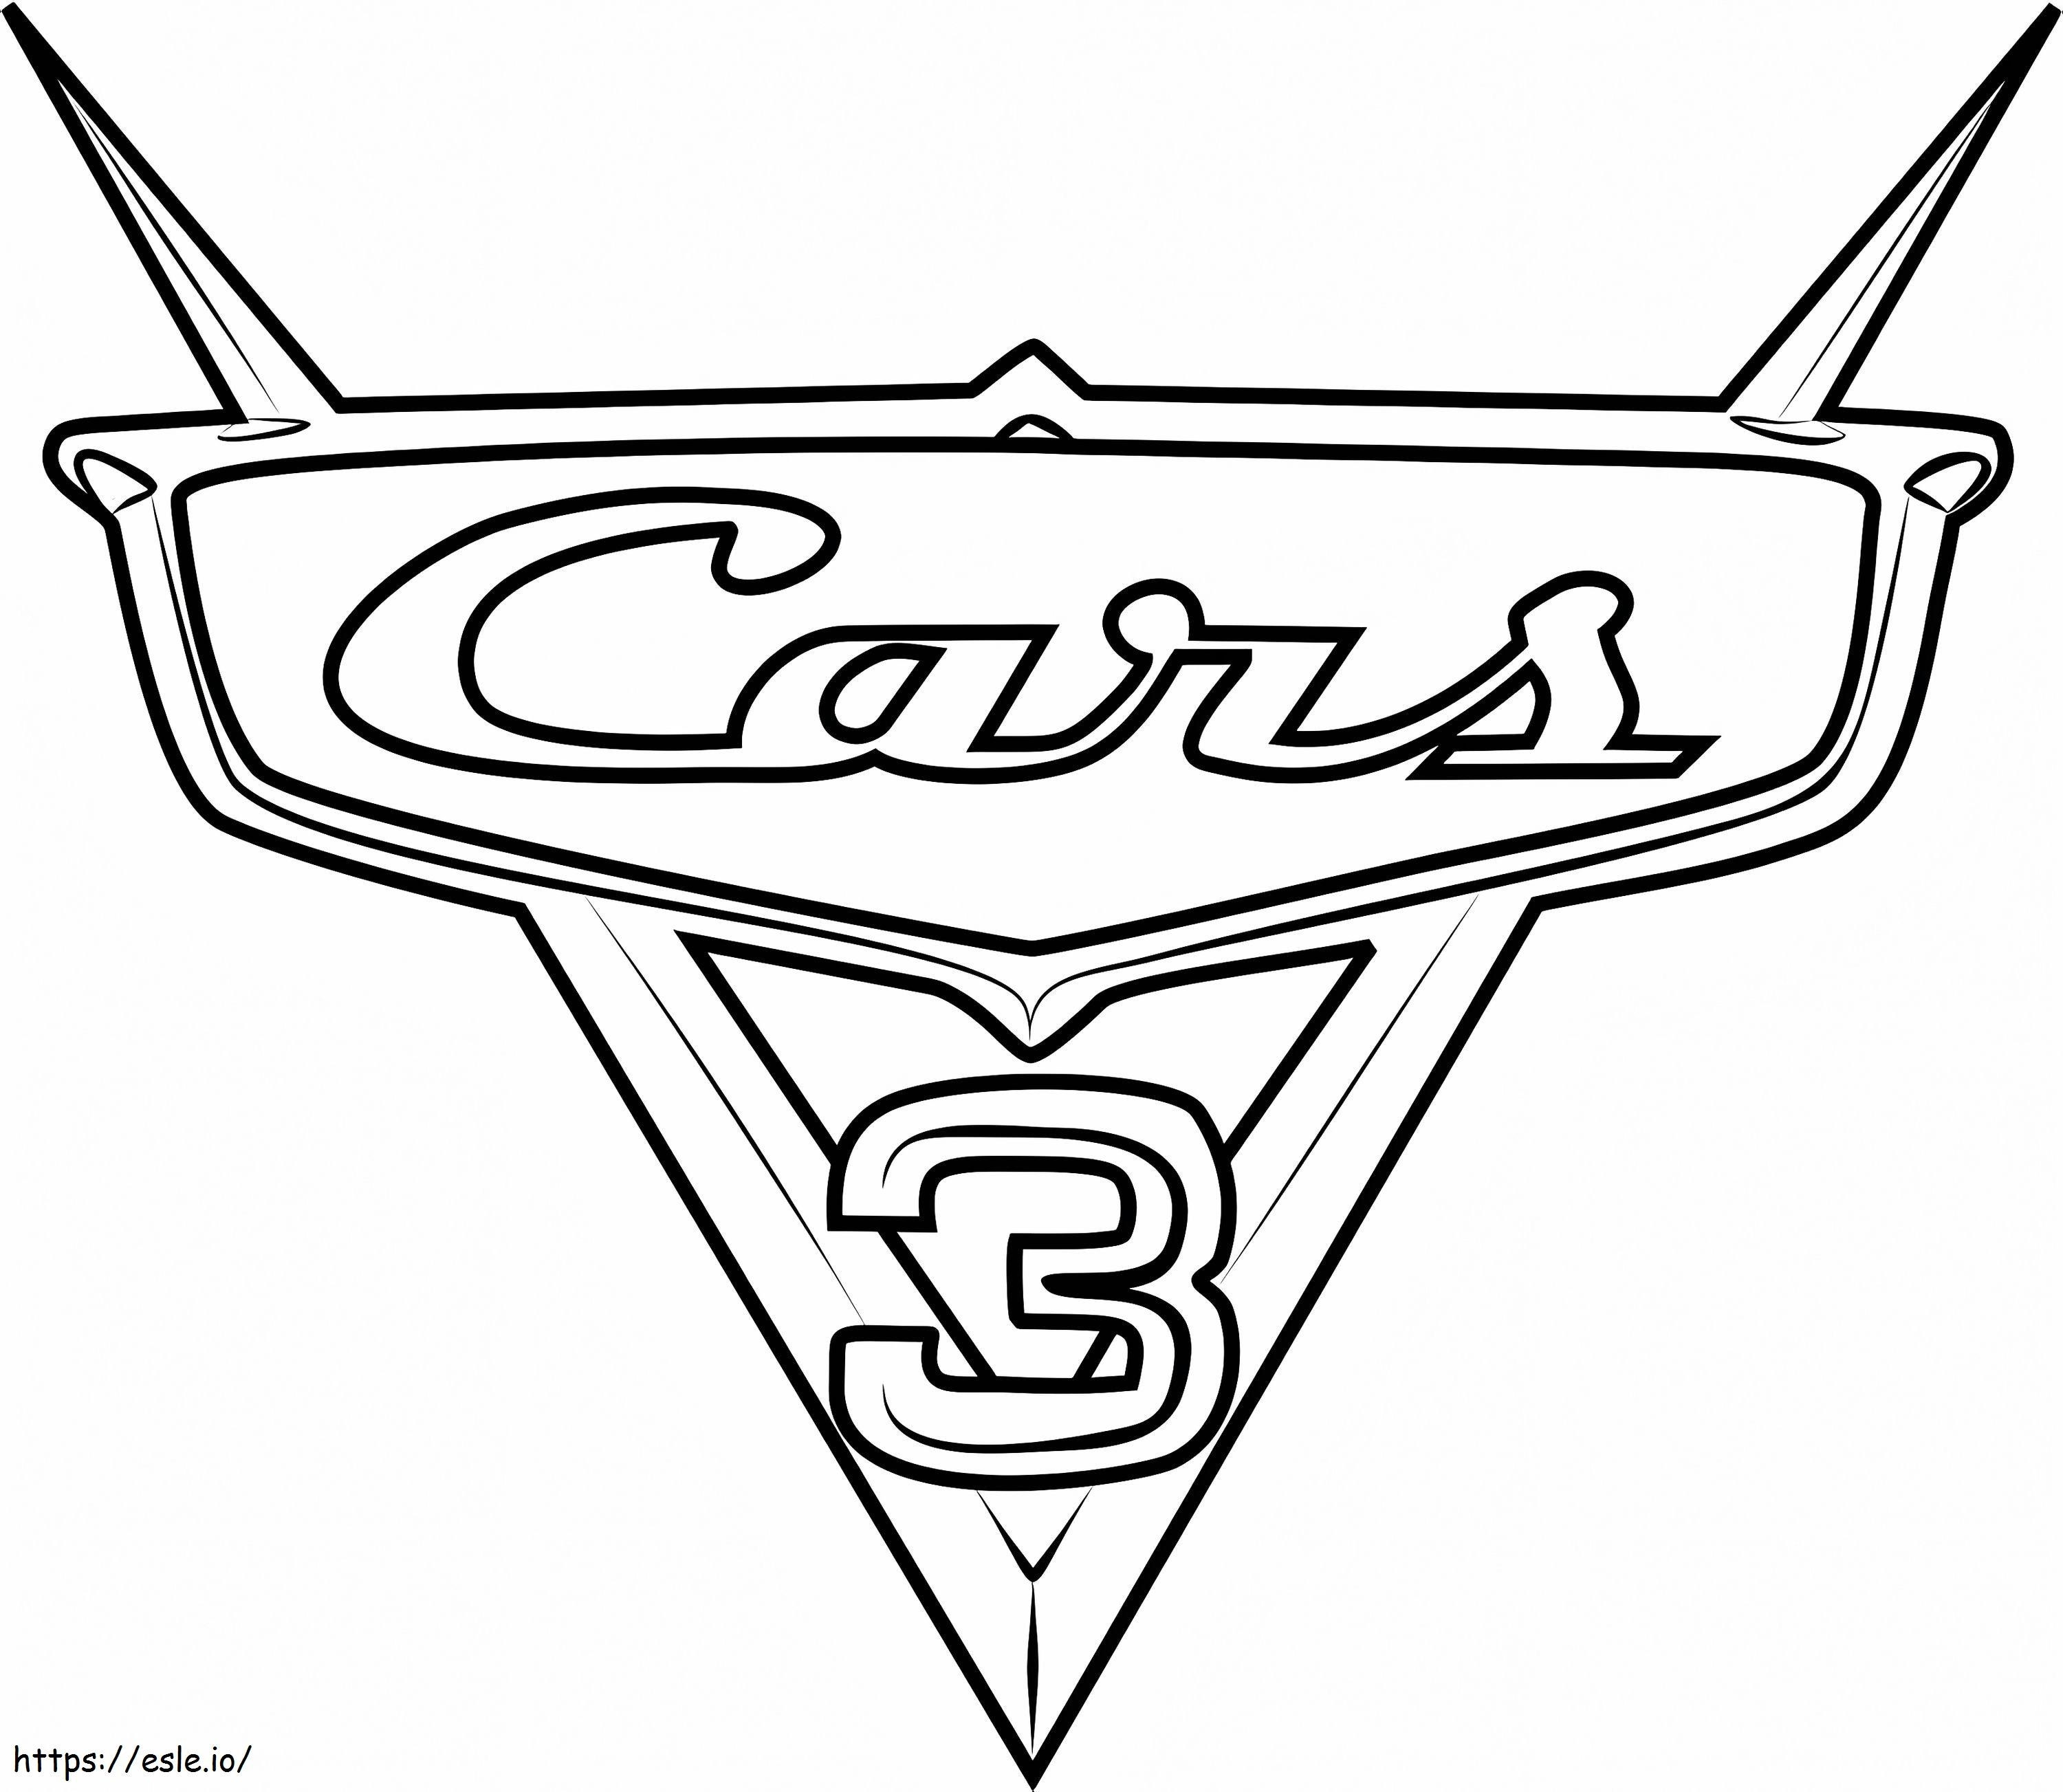 Cars 3 Logo From Cars 31 coloring page